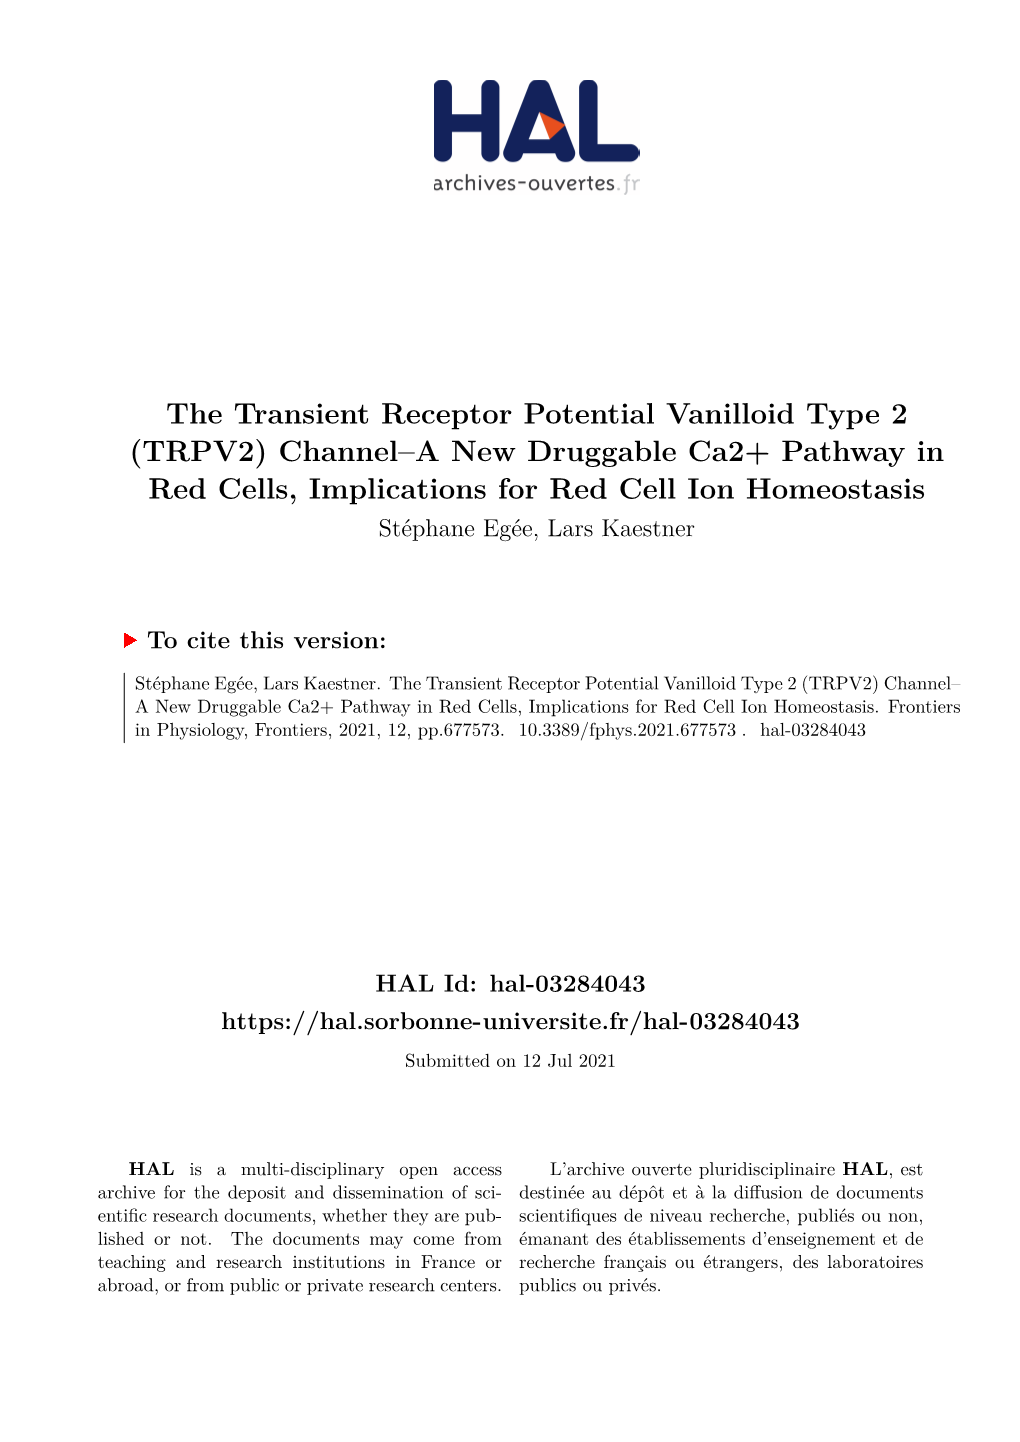 The Transient Receptor Potential Vanilloid Type 2 (TRPV2) Channel